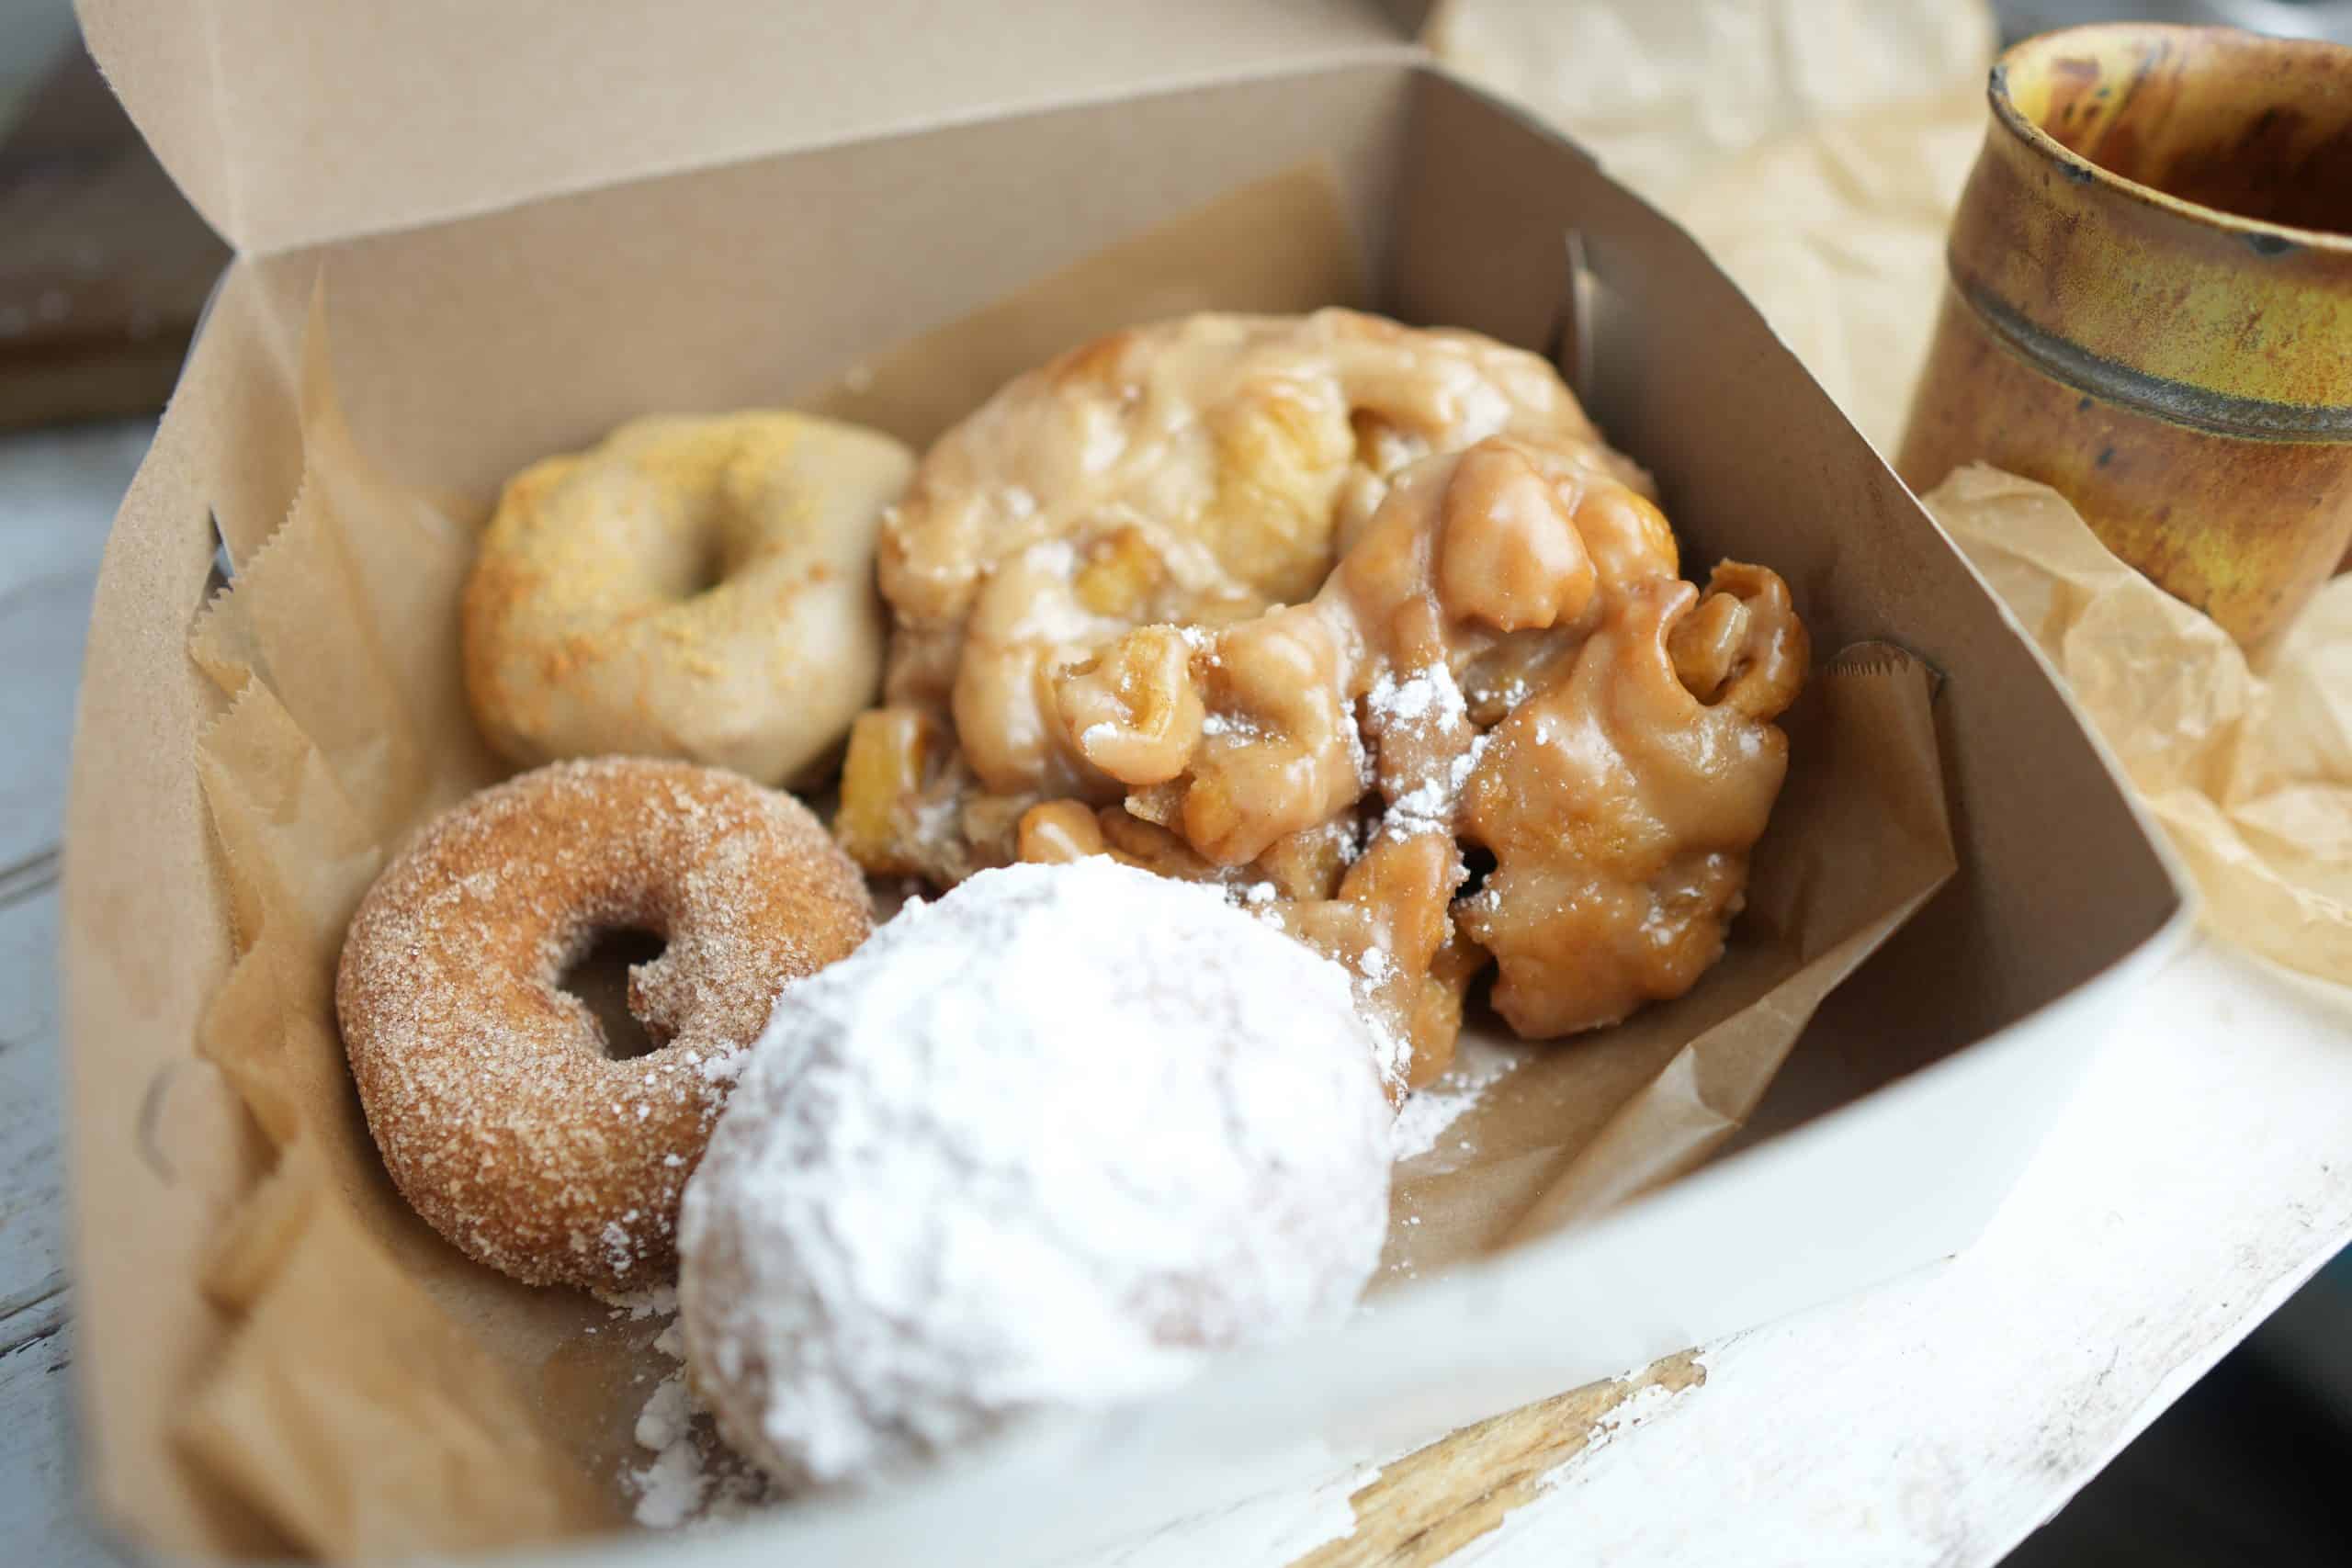 Apple cider glazed apple fritter in a pastry box along with other fresh vegan donuts